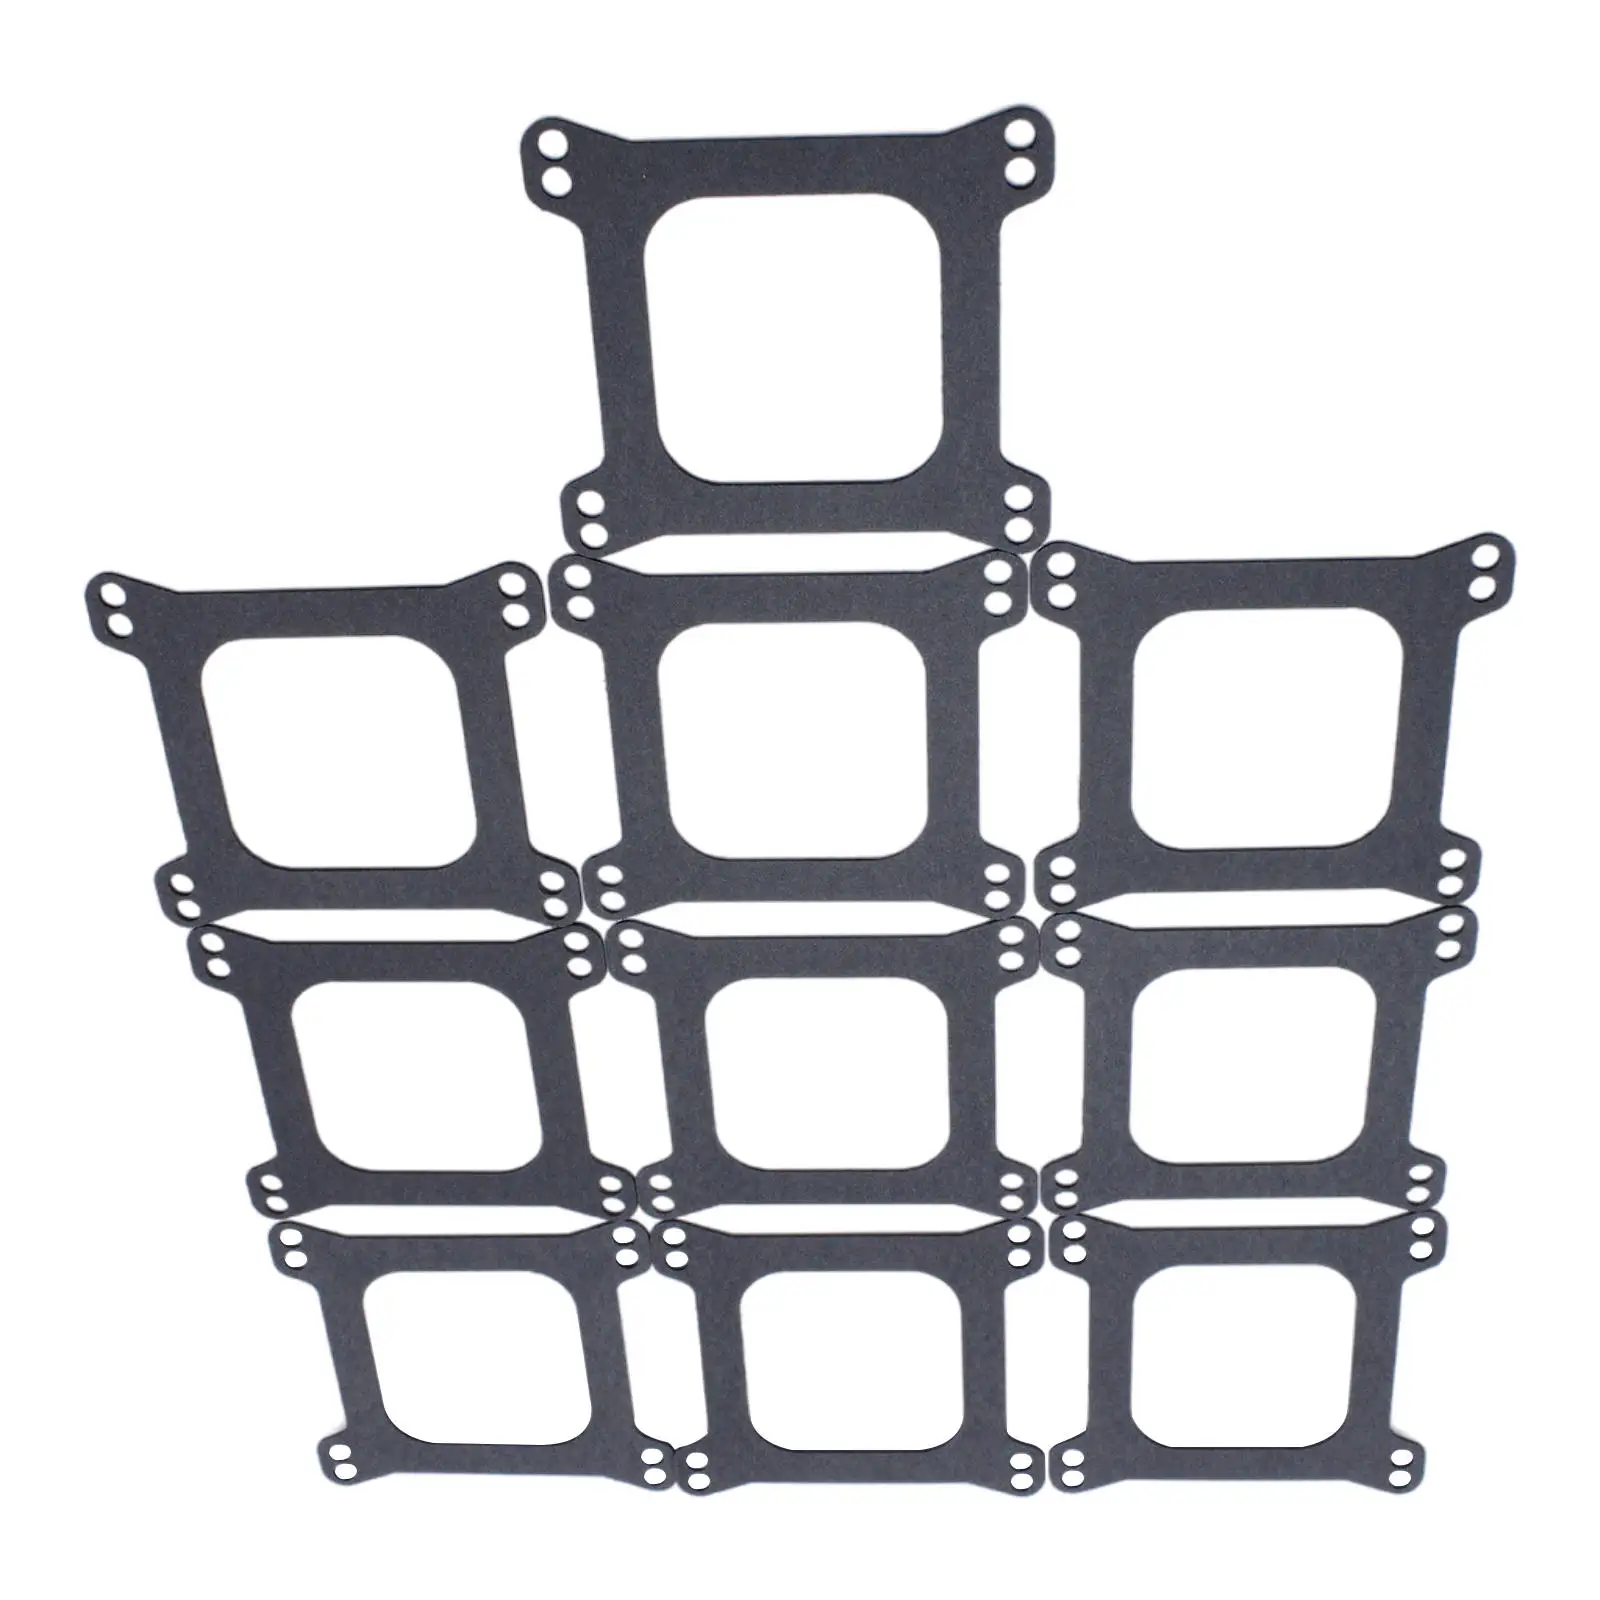 10 Pieces Carburetor Gasket Kit 2033 Square Bore High Temperature Base Gaskets for Barry Grant